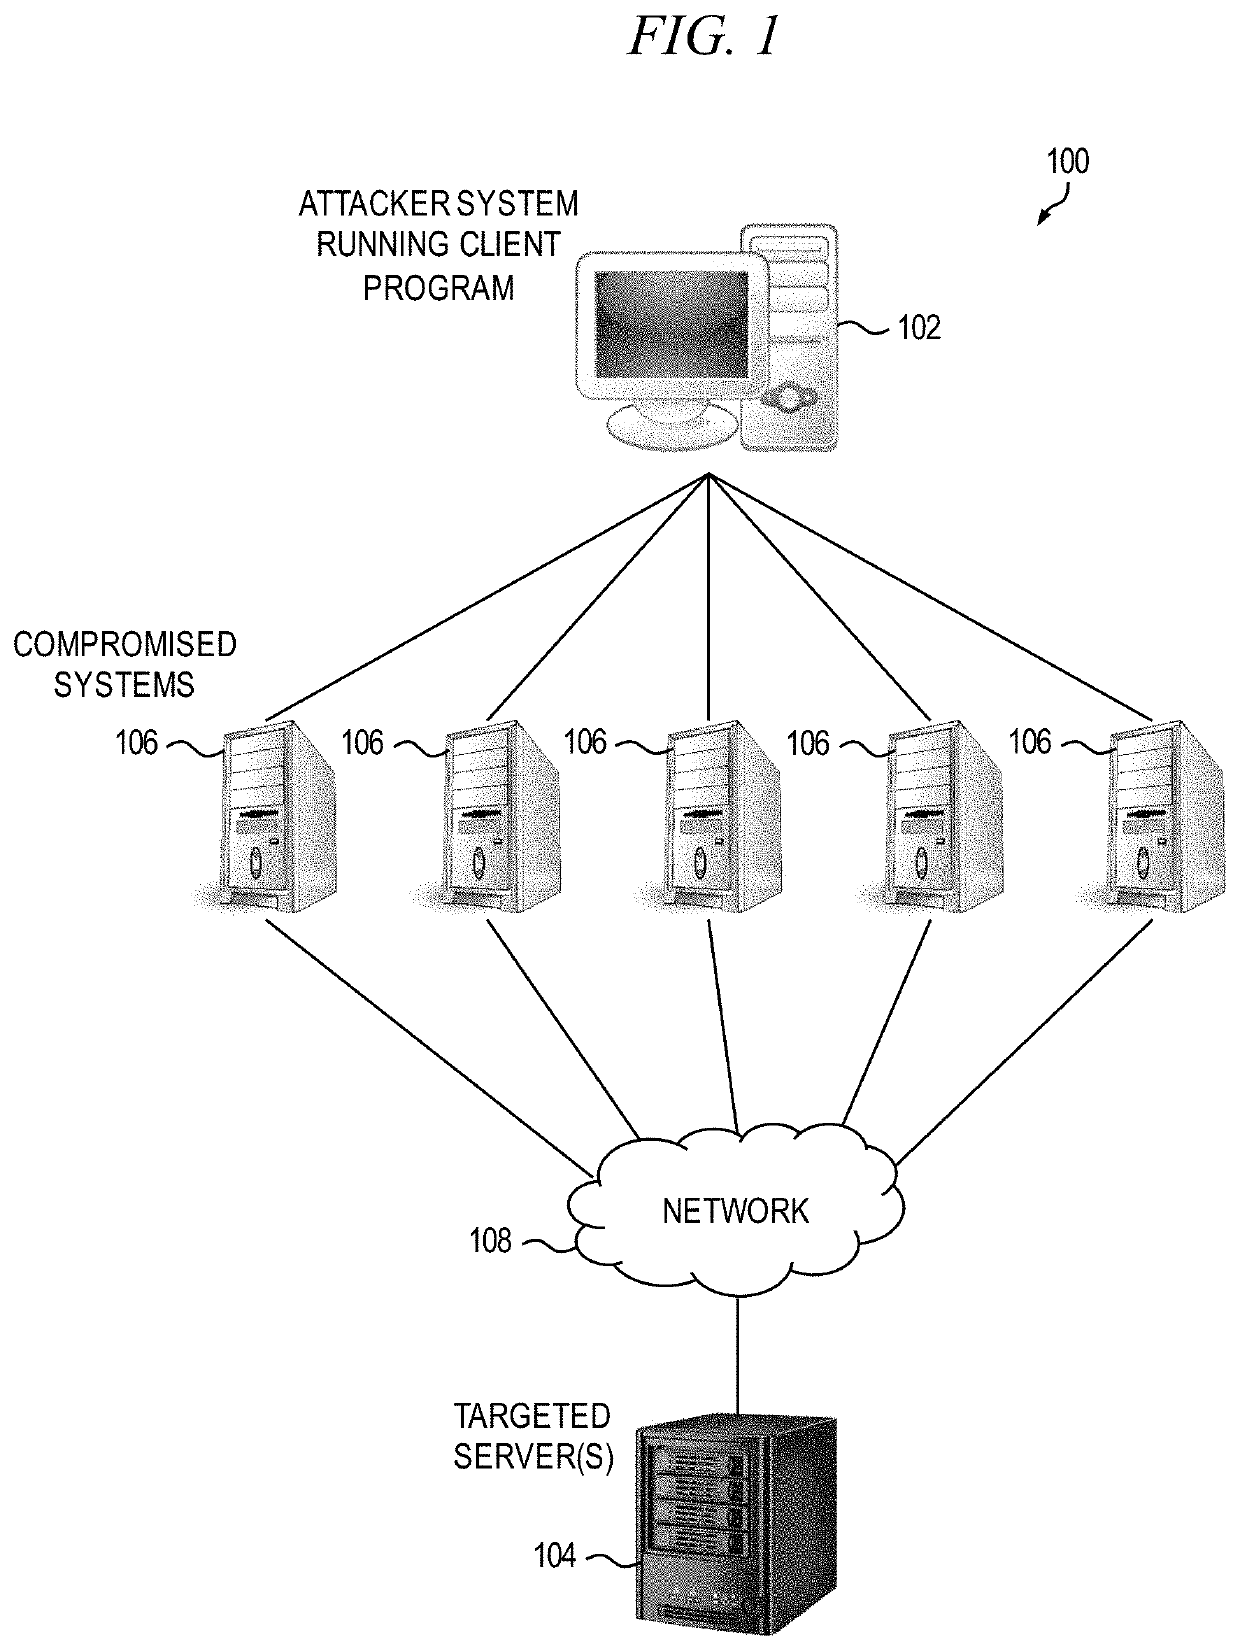 Denial-of-service detection and mitigation solution